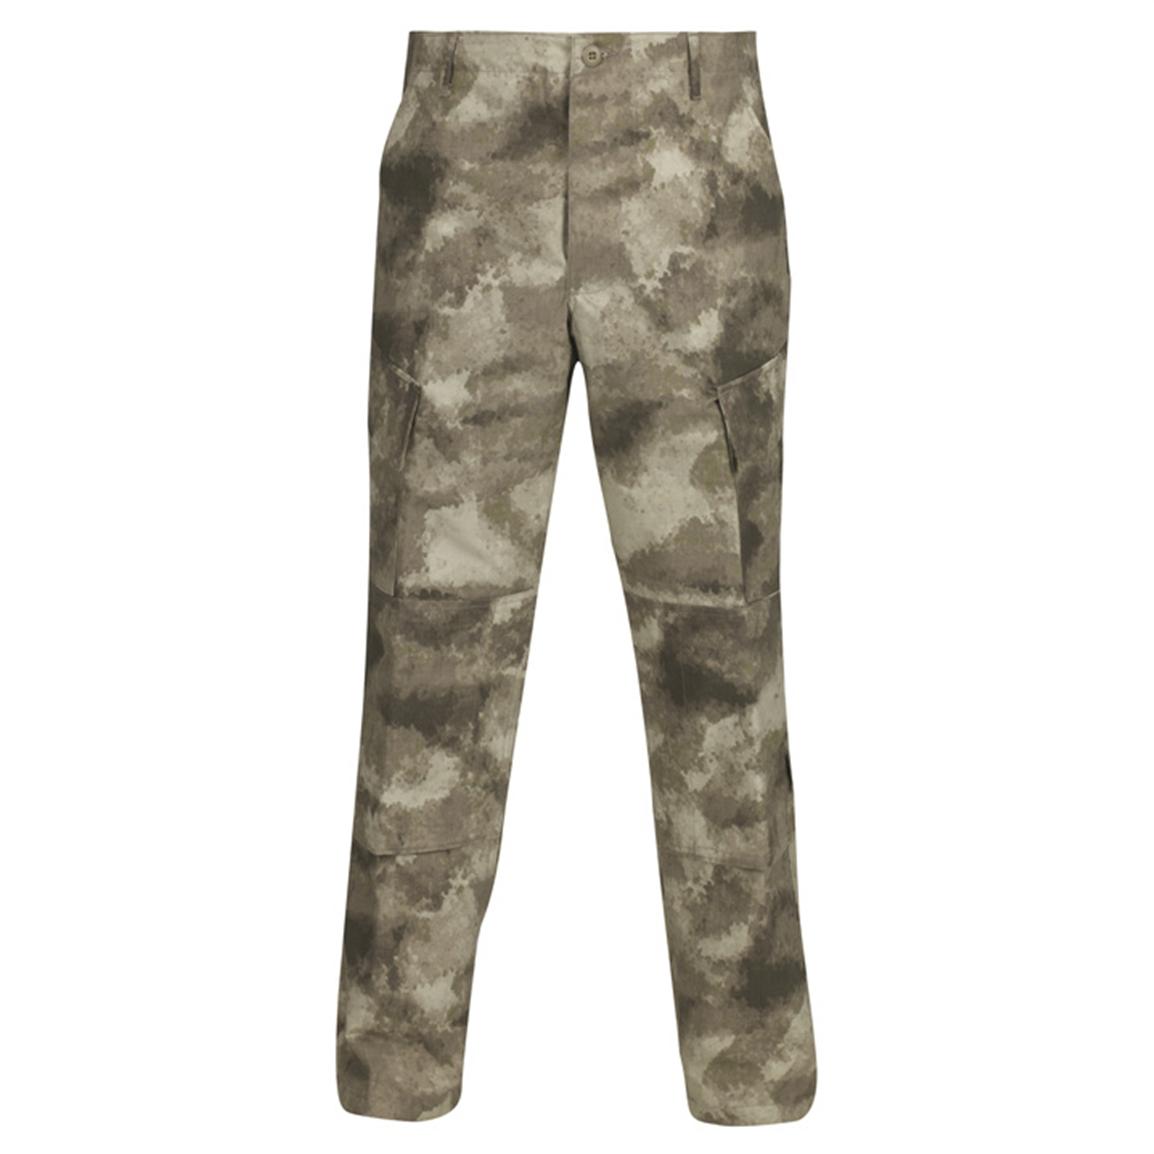 Men's Propper ACU Pants - 592912, Tactical Clothing at Sportsman's Guide